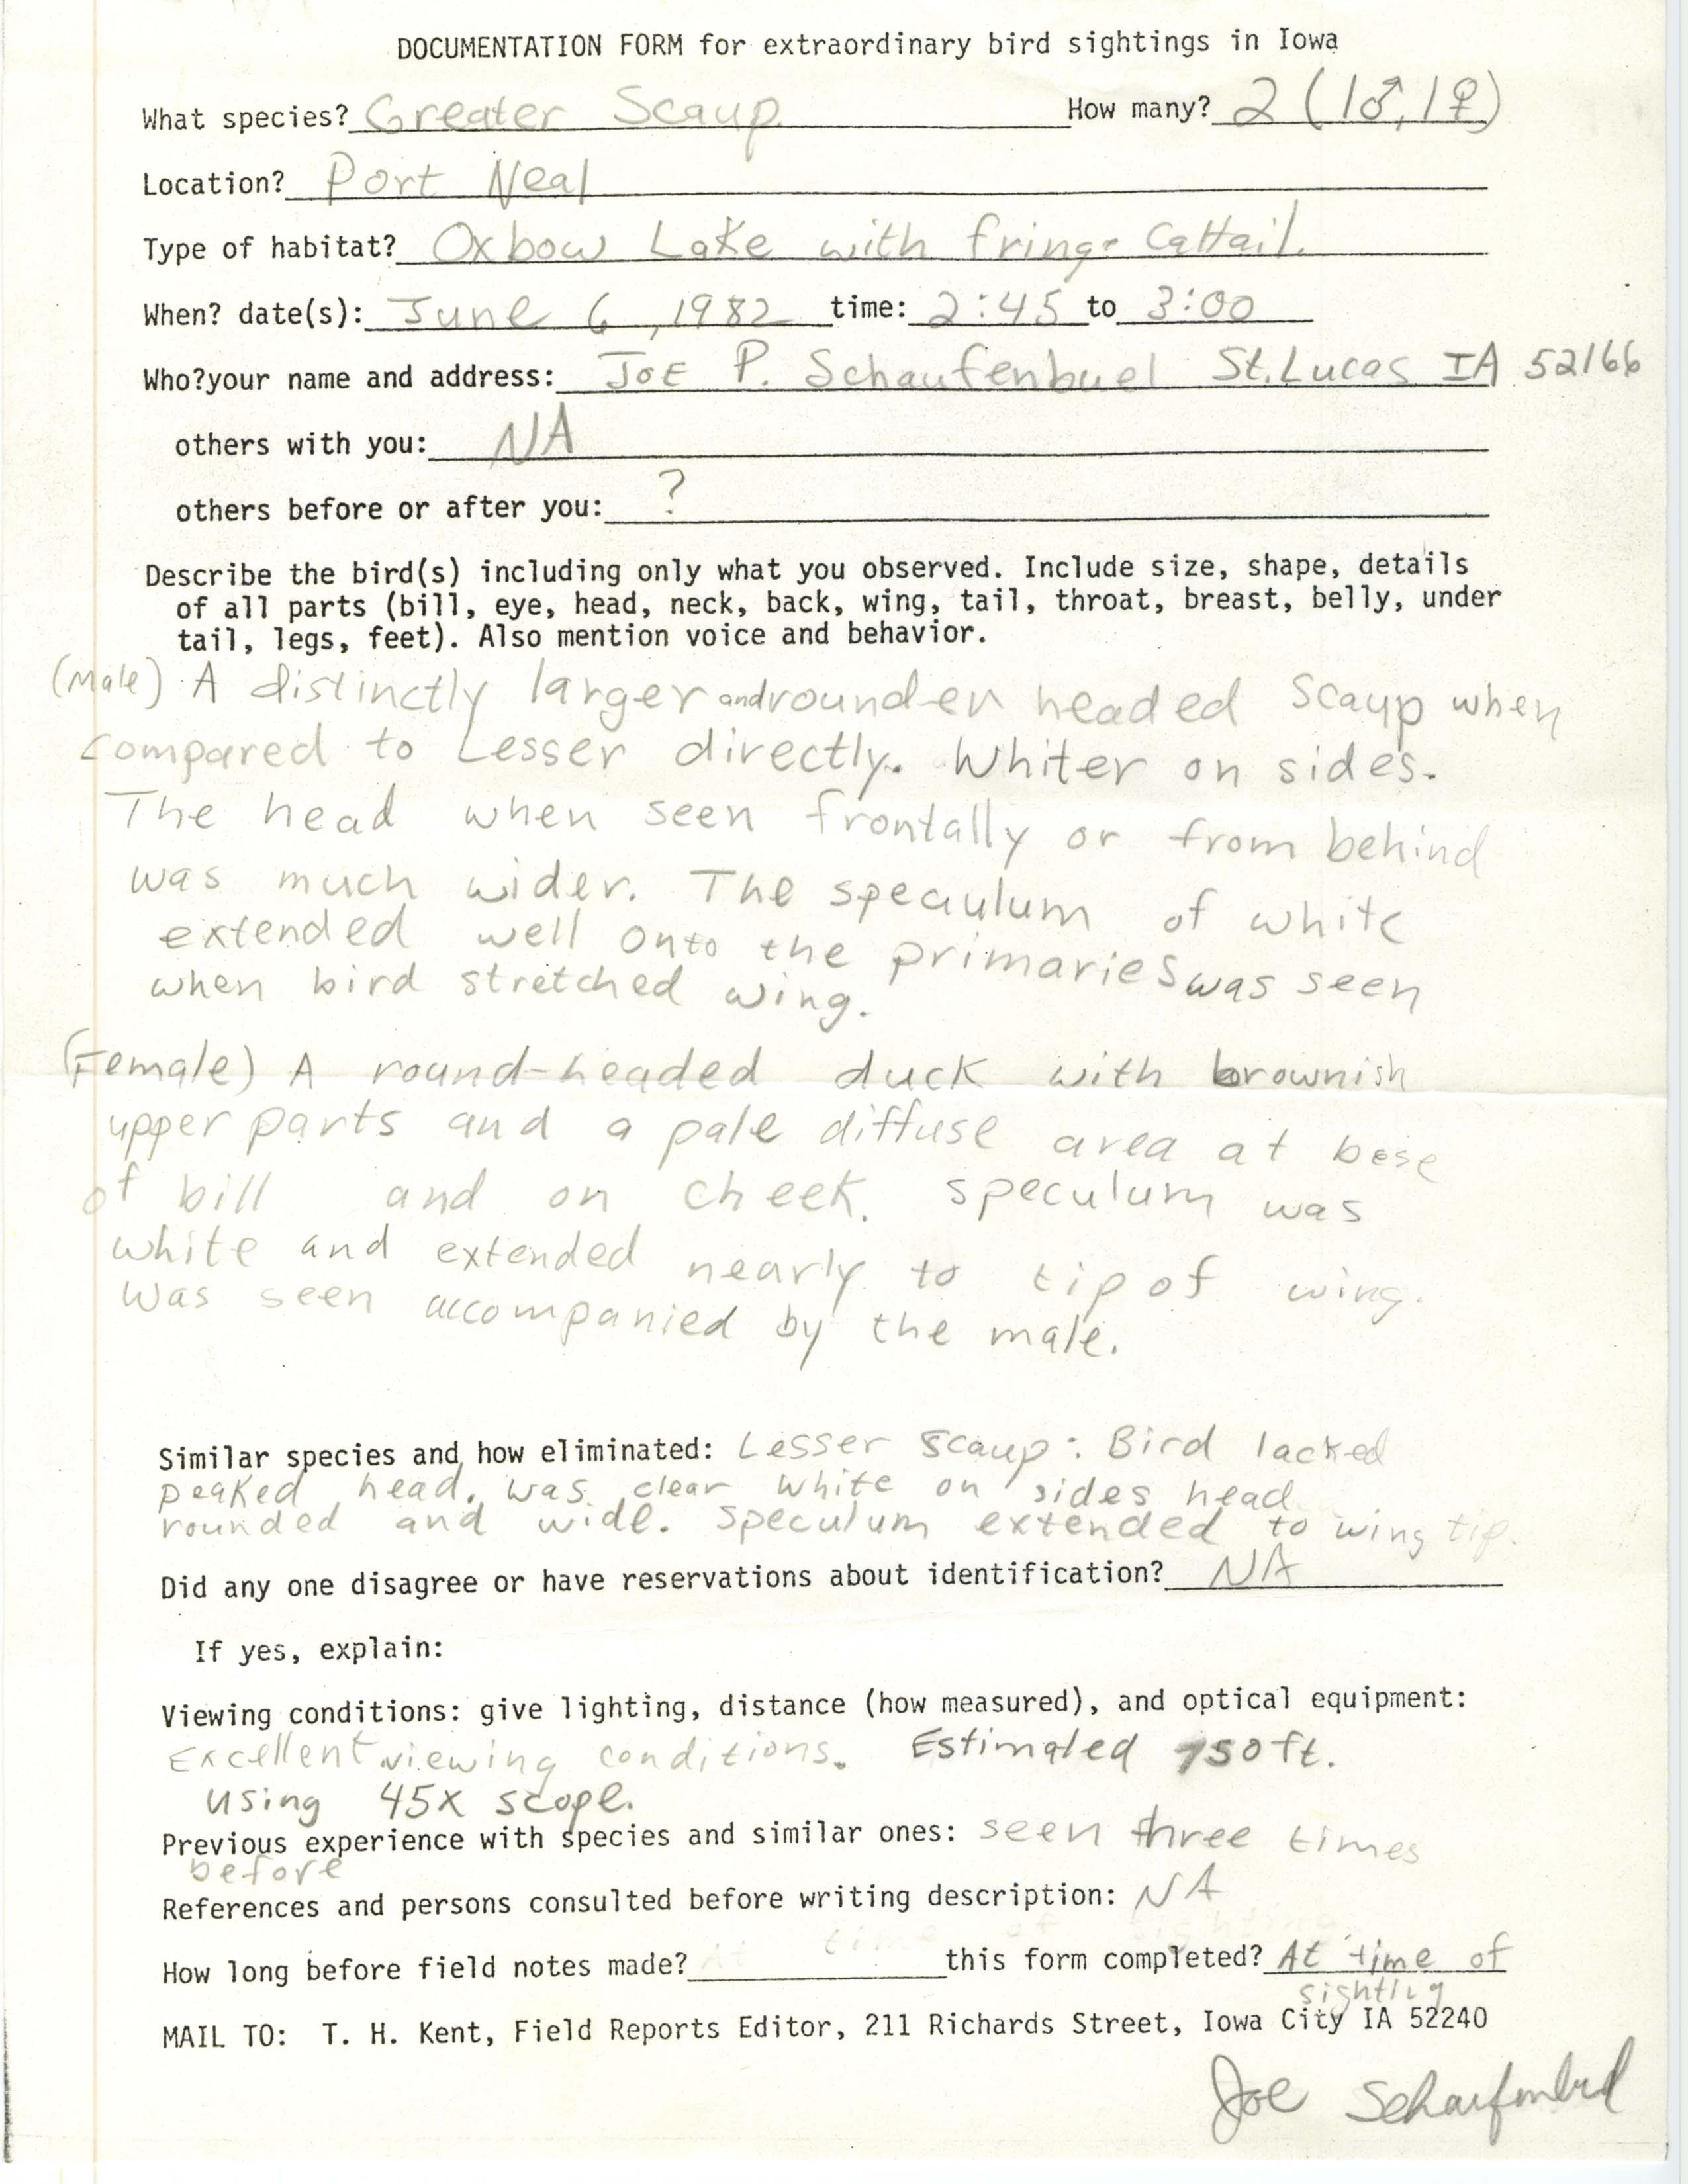 Rare bird documentation form for Greater Scaup at Port Neal, 1982